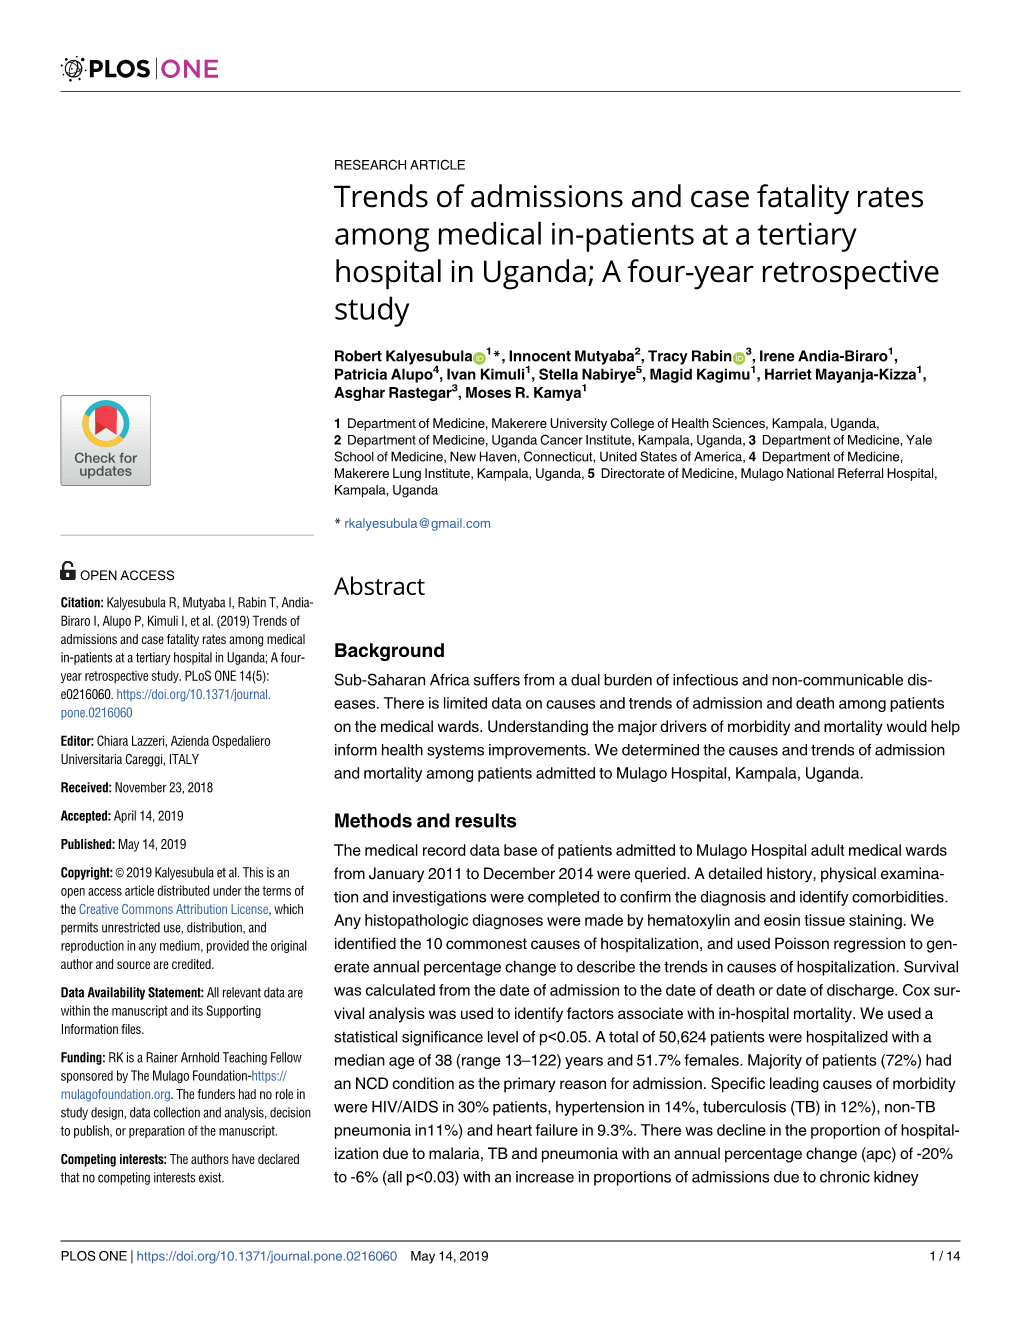 Trends of Admissions and Case Fatality Rates Among Medical In-Patients at a Tertiary Hospital in Uganda; a Four-Year Retrospective Study